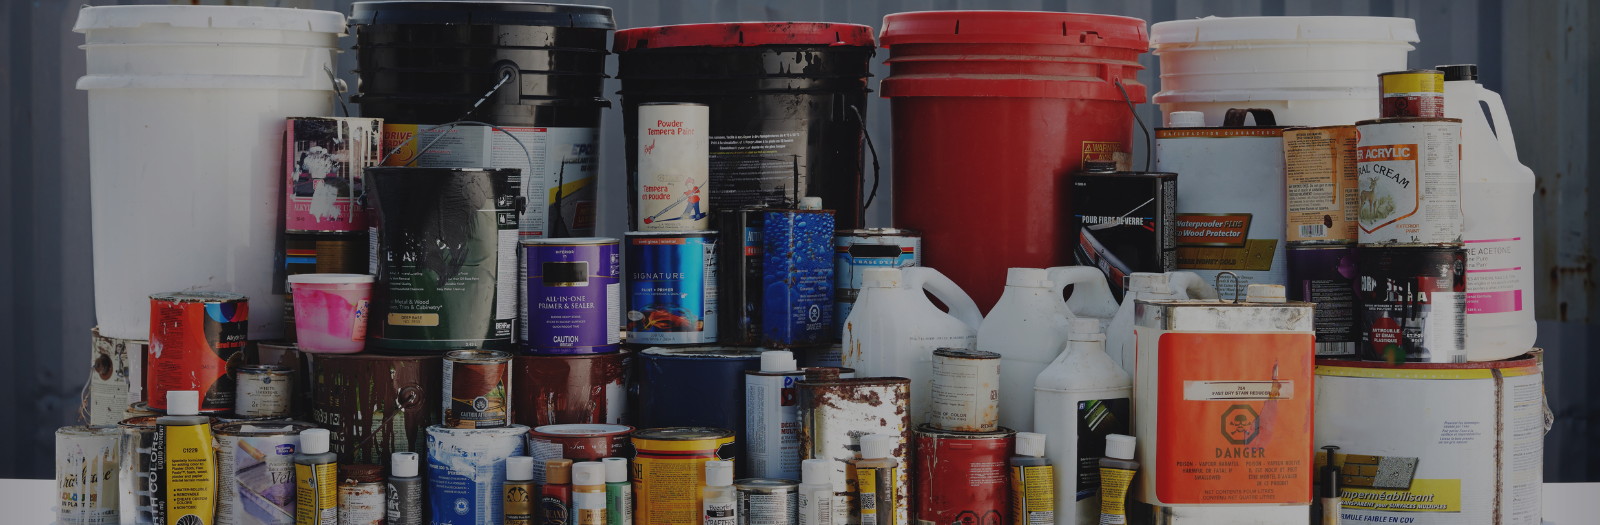 HSP paints, coatings and solvents